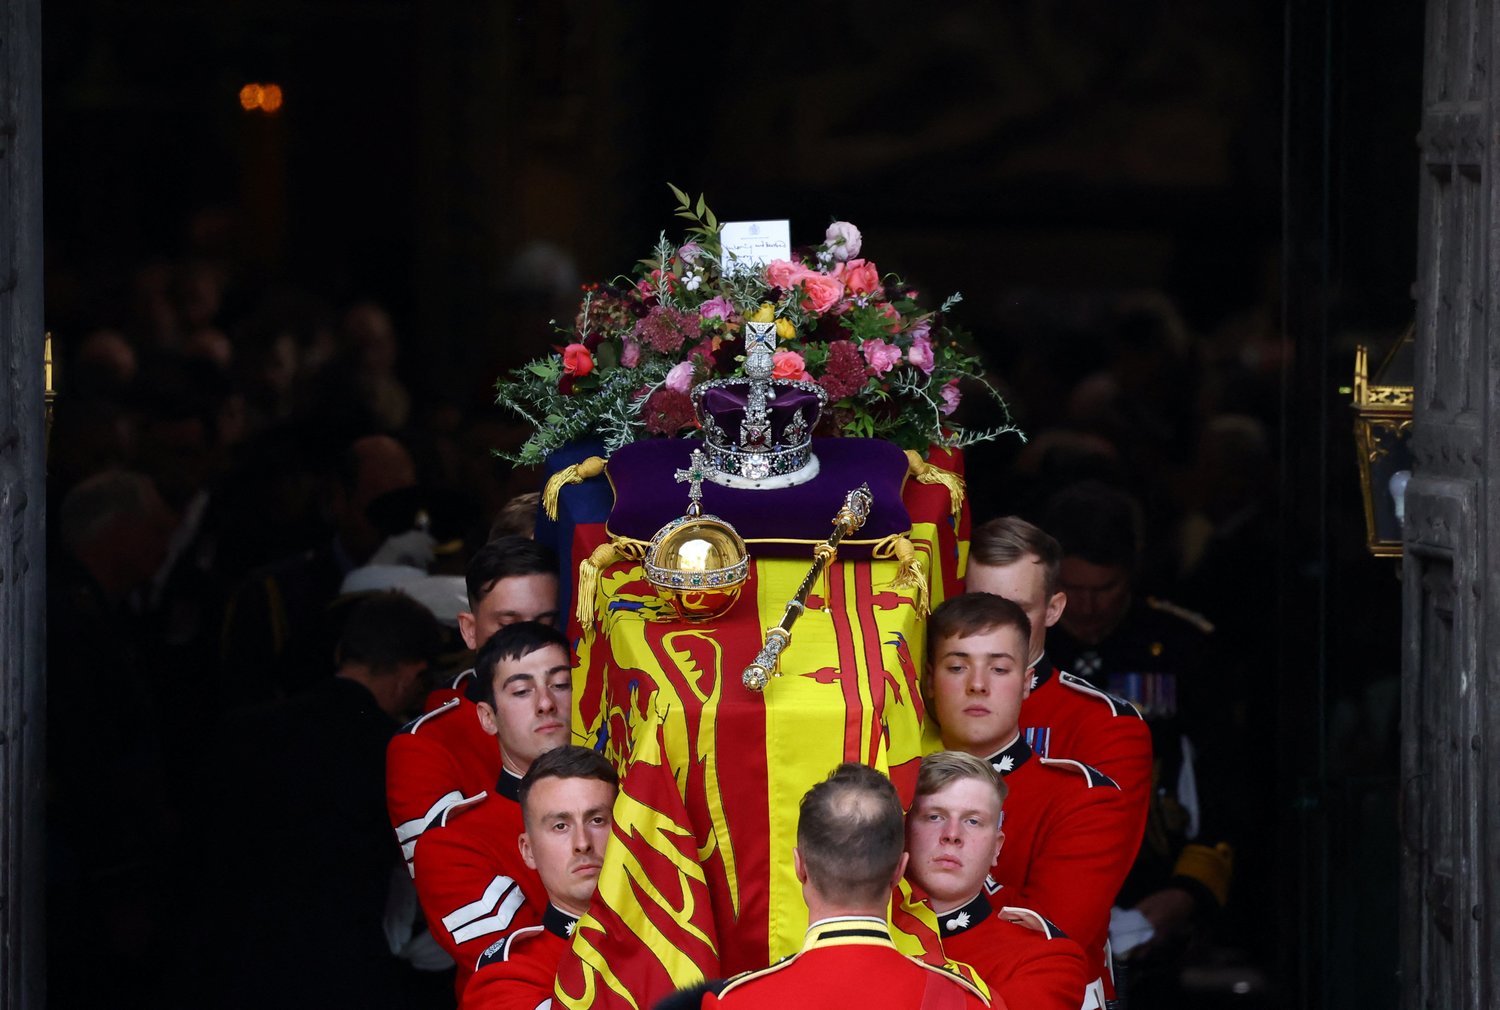 Pallbearers carry the casket of Queen Elizabeth II with the Imperial State Crown resting on top out of Westminster Abbey following her state funeral in London Sept. 19.